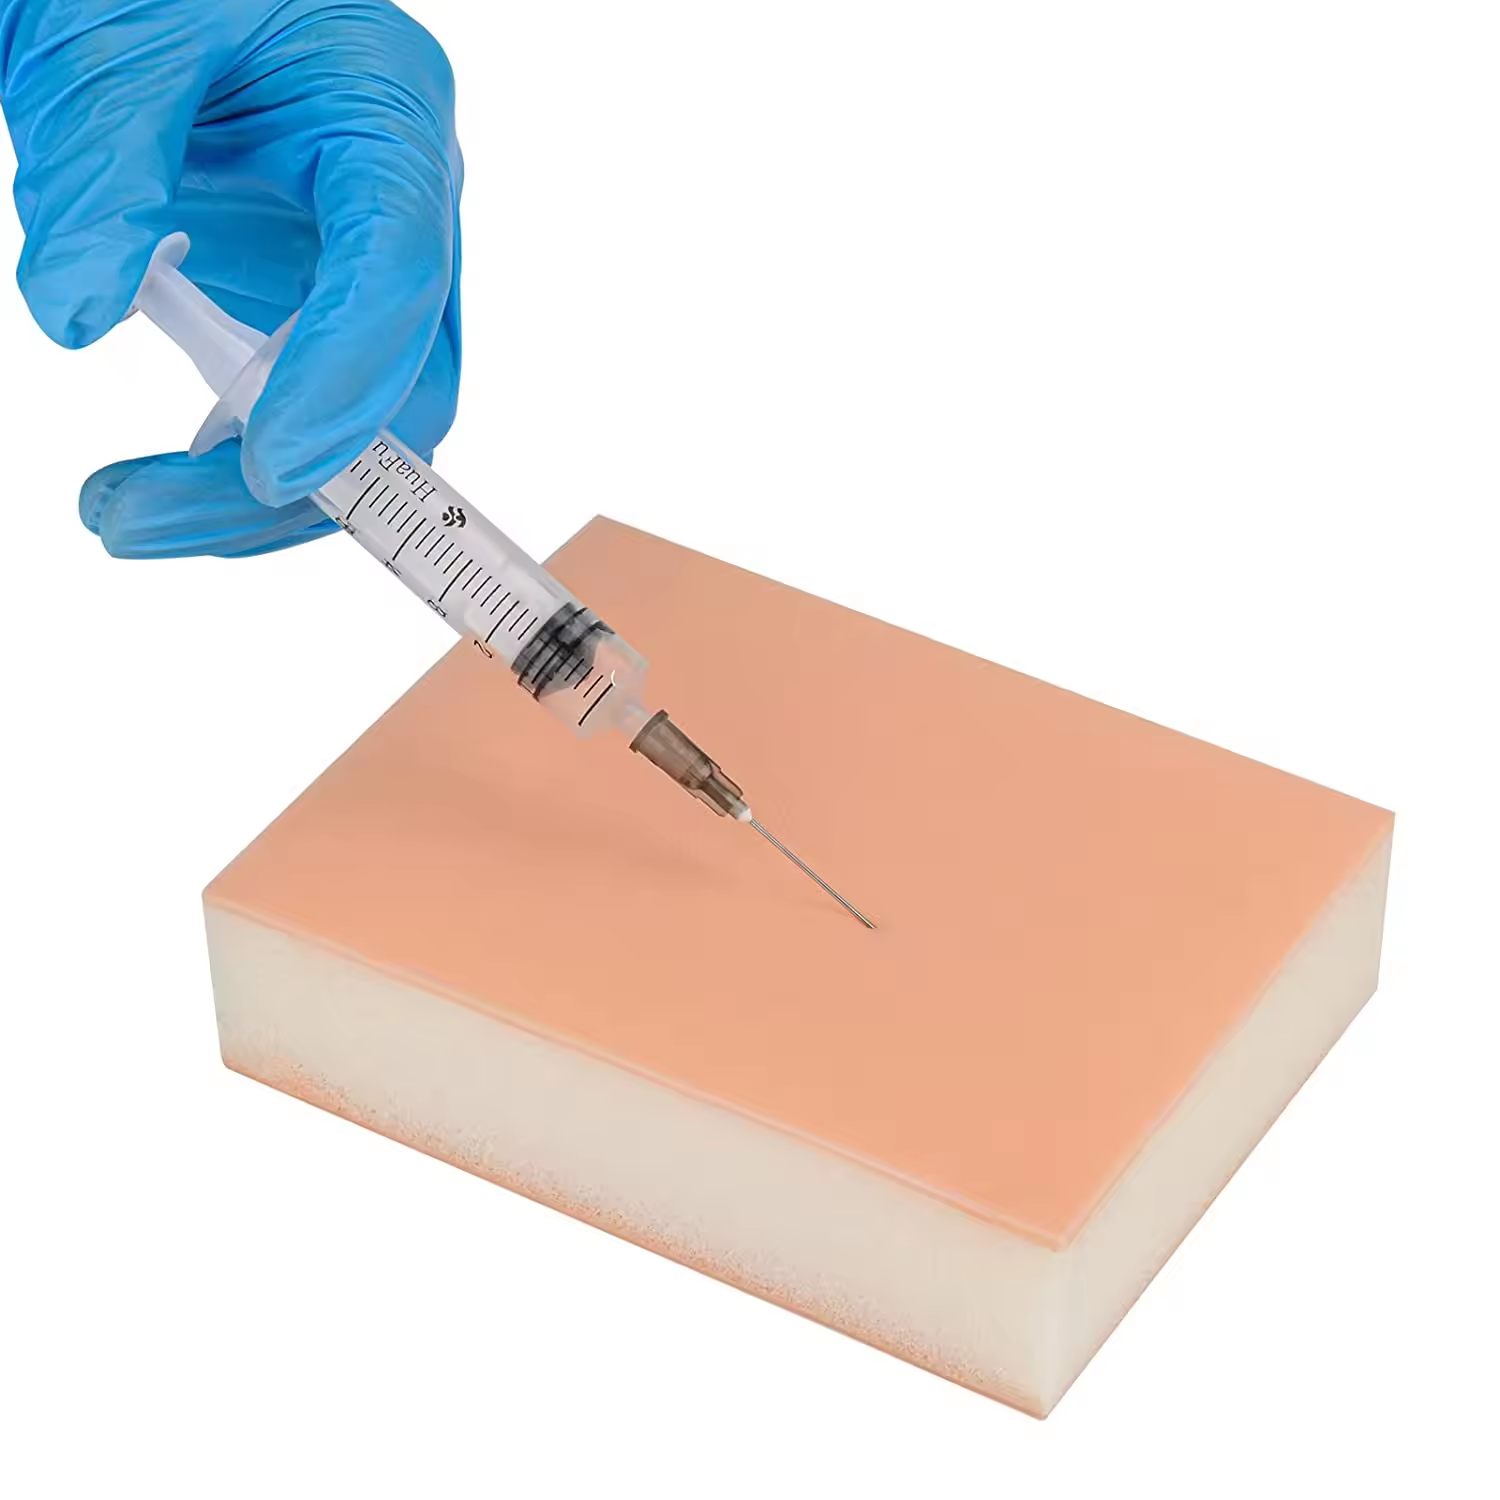 Nursing Medical Students Ultrassist Injection Training Pad Teaching Model with Absorbent Sponge